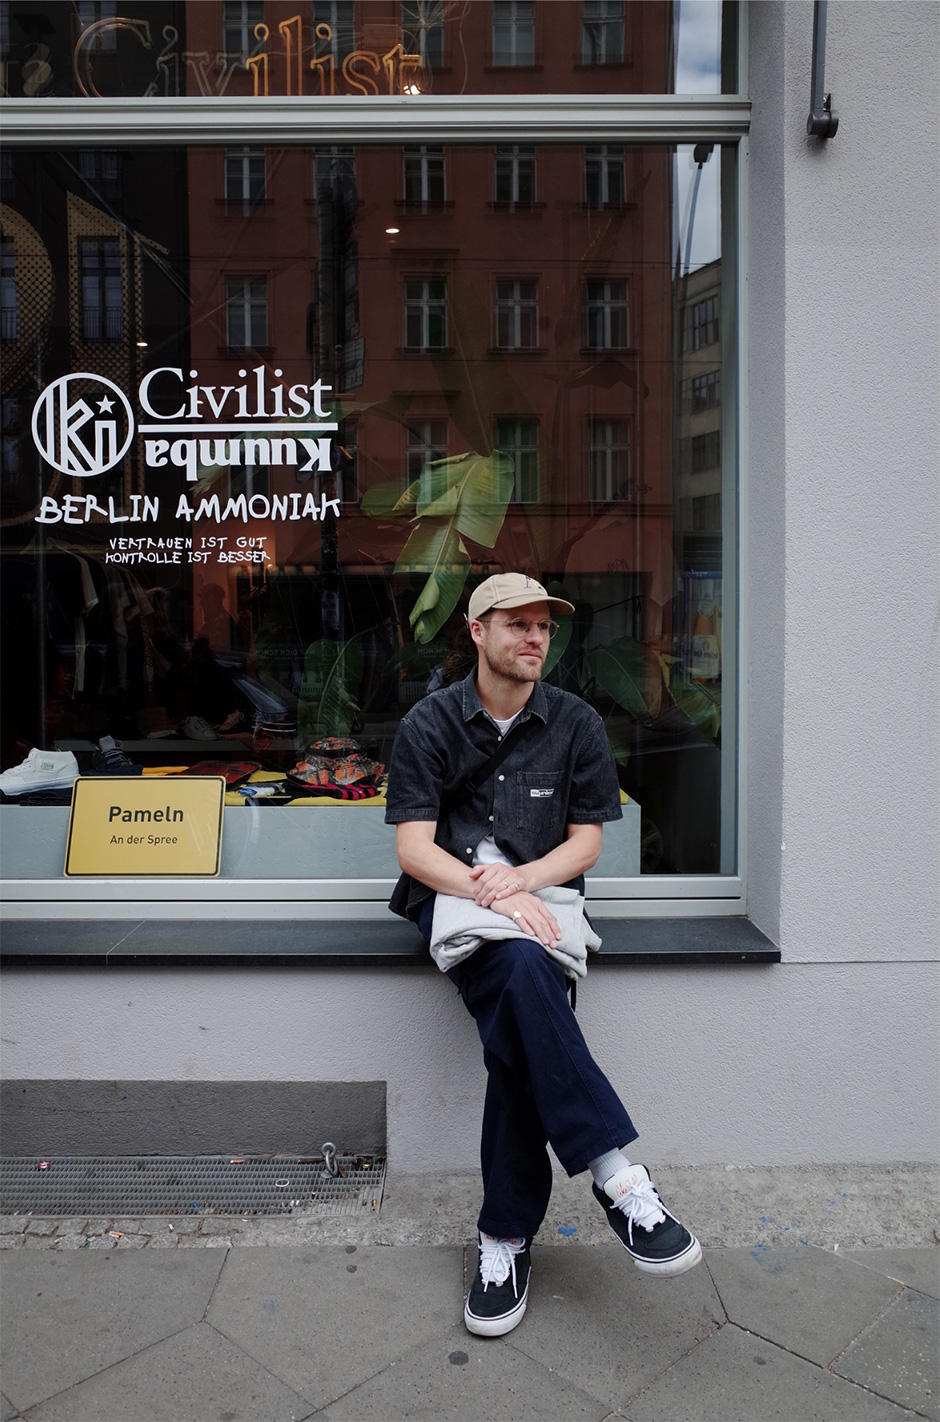 Dave checking in with key accounts. Outside Civilist in Berlin